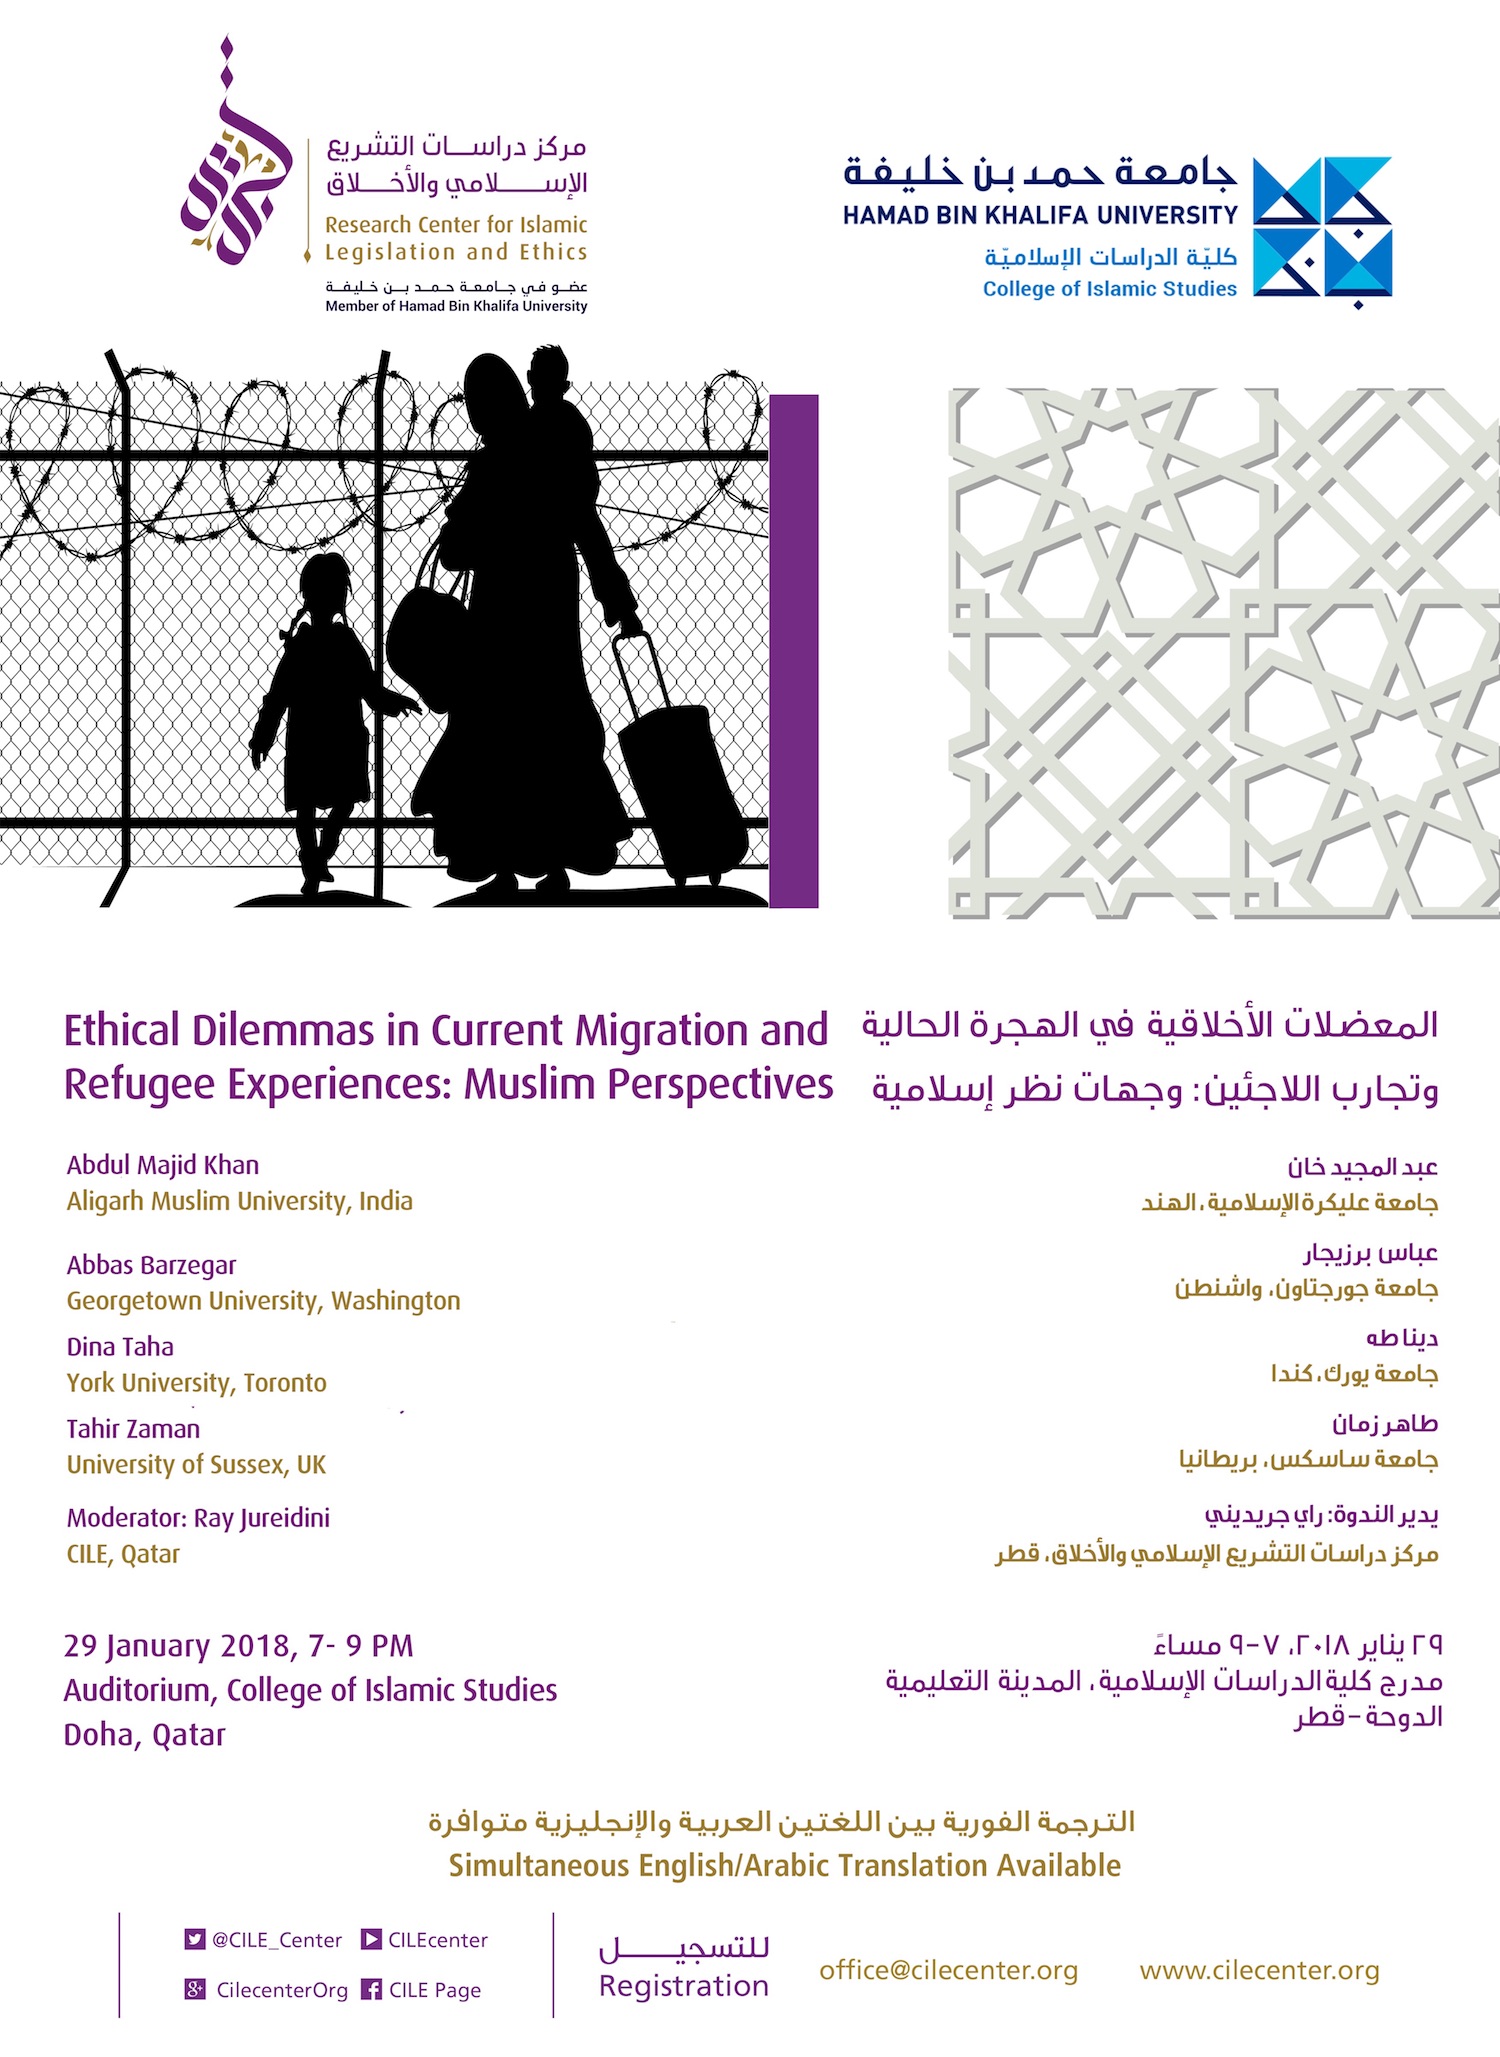 01/2018 Ethical Dilemmas in Current Migration & Refugee Experiences: Muslim Perspectives